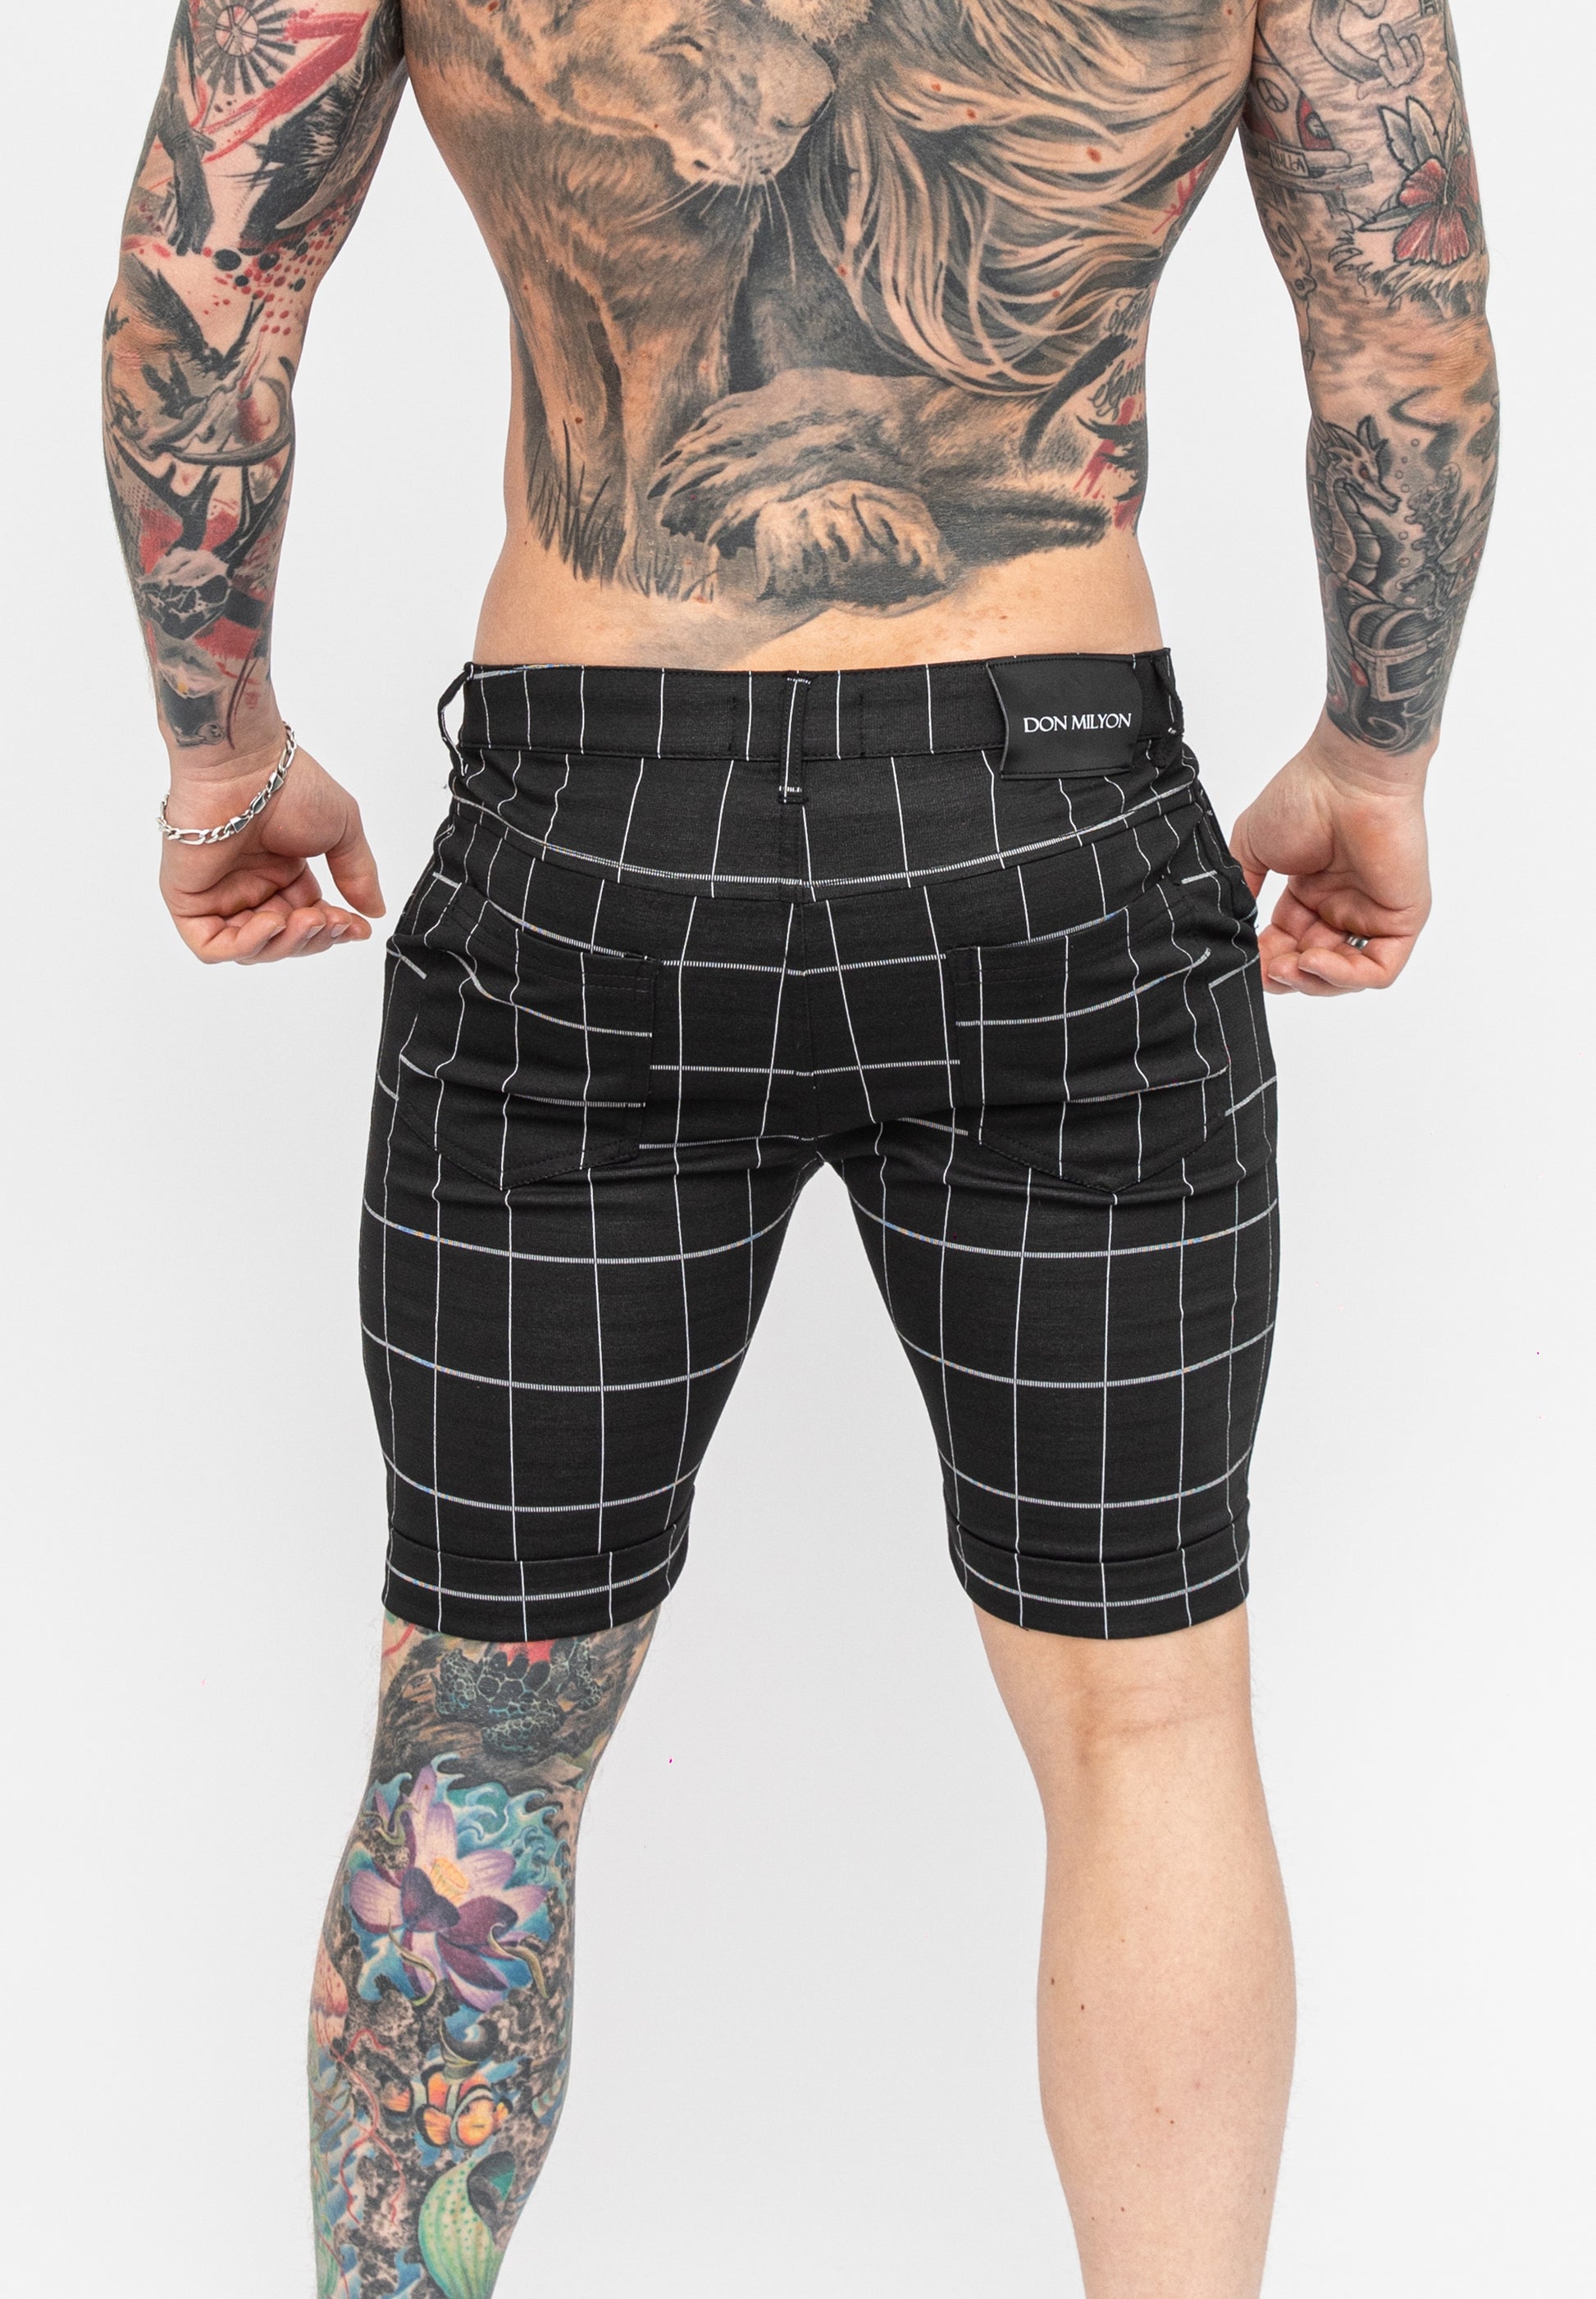 Black Skinny Fit Stretch Men's Check Pattern Chino Shorts Rear Glutes